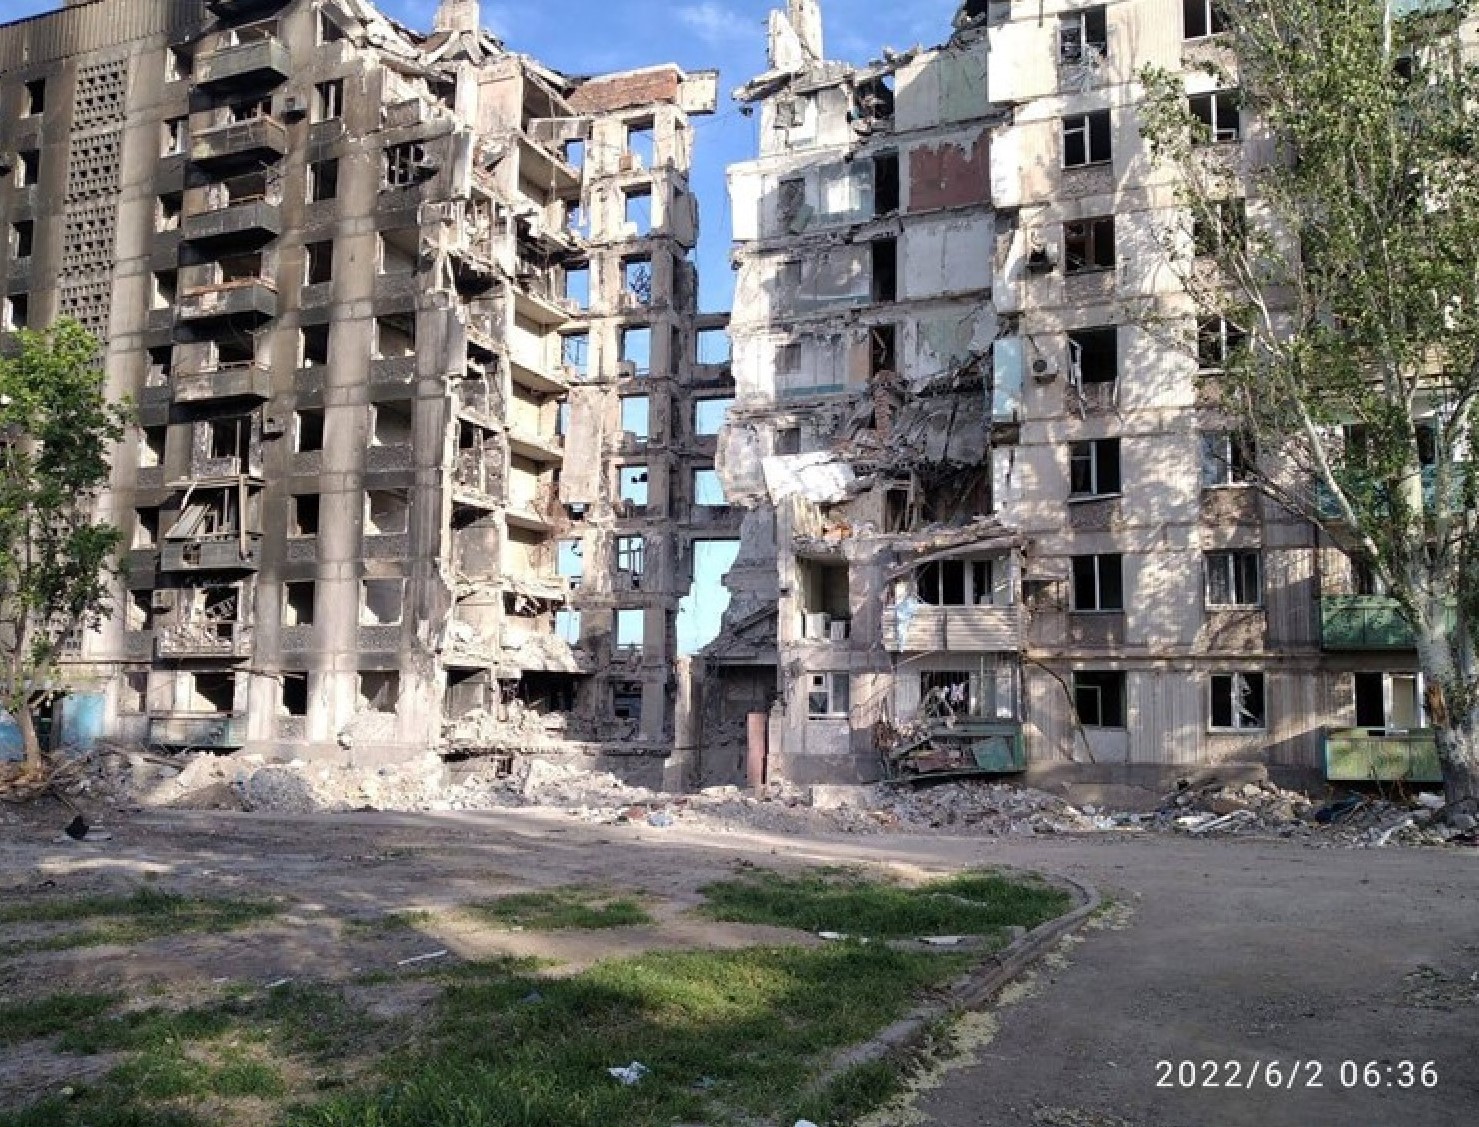 Mariupol devastated by the Russian invaders Photo Mariupol City Council